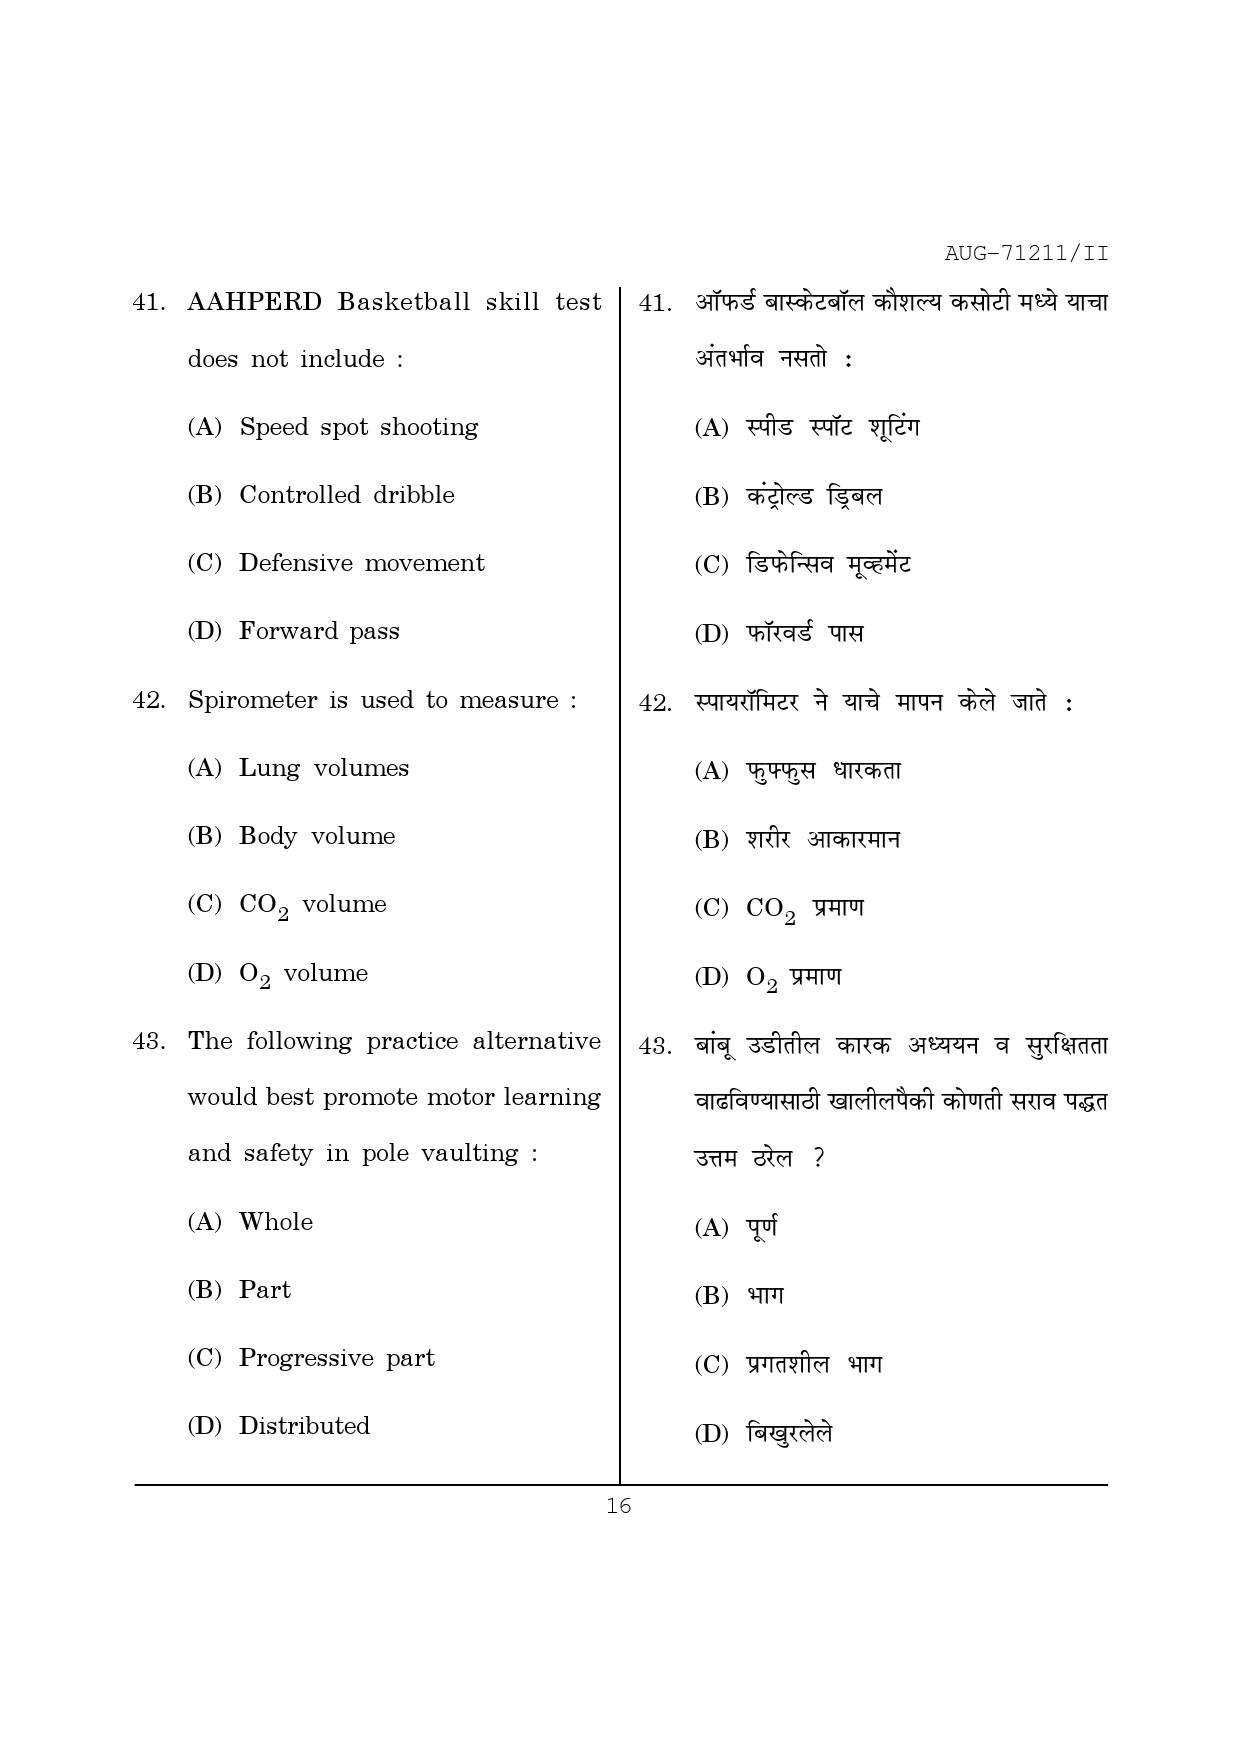 Maharashtra SET Physical Education Question Paper II August 2011 16